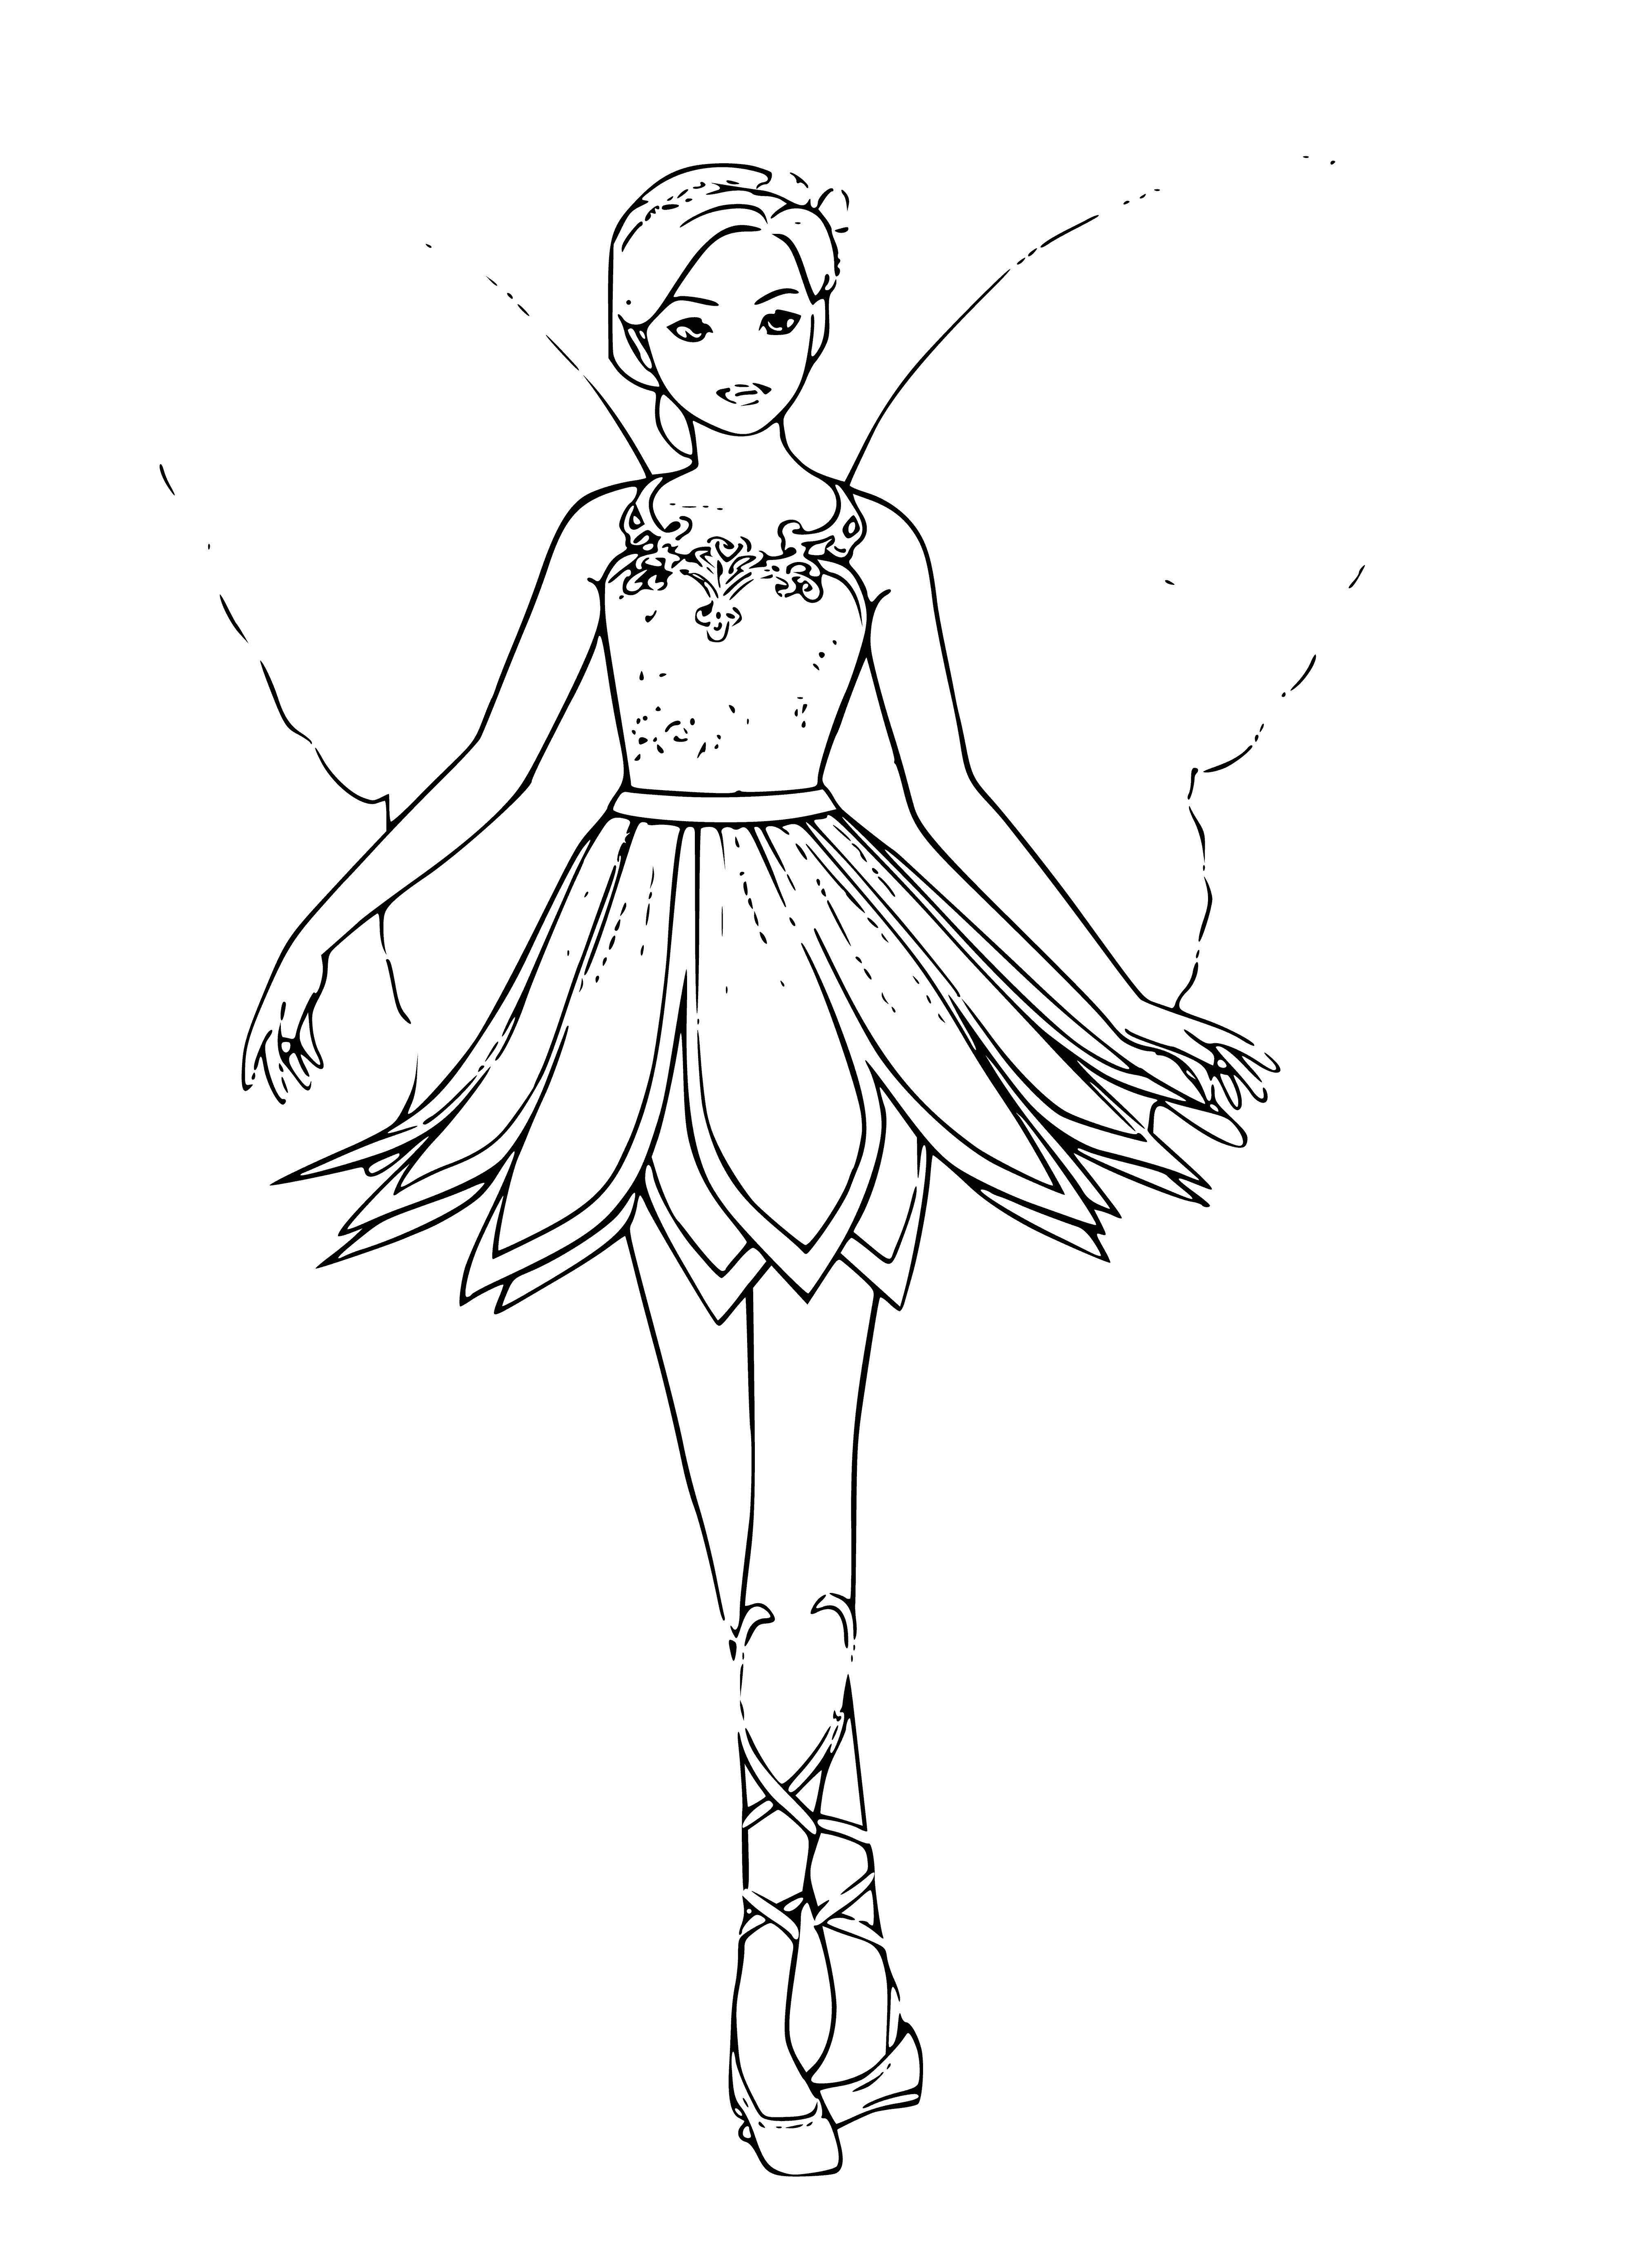 Fairy butterfly Mariposa coloring page